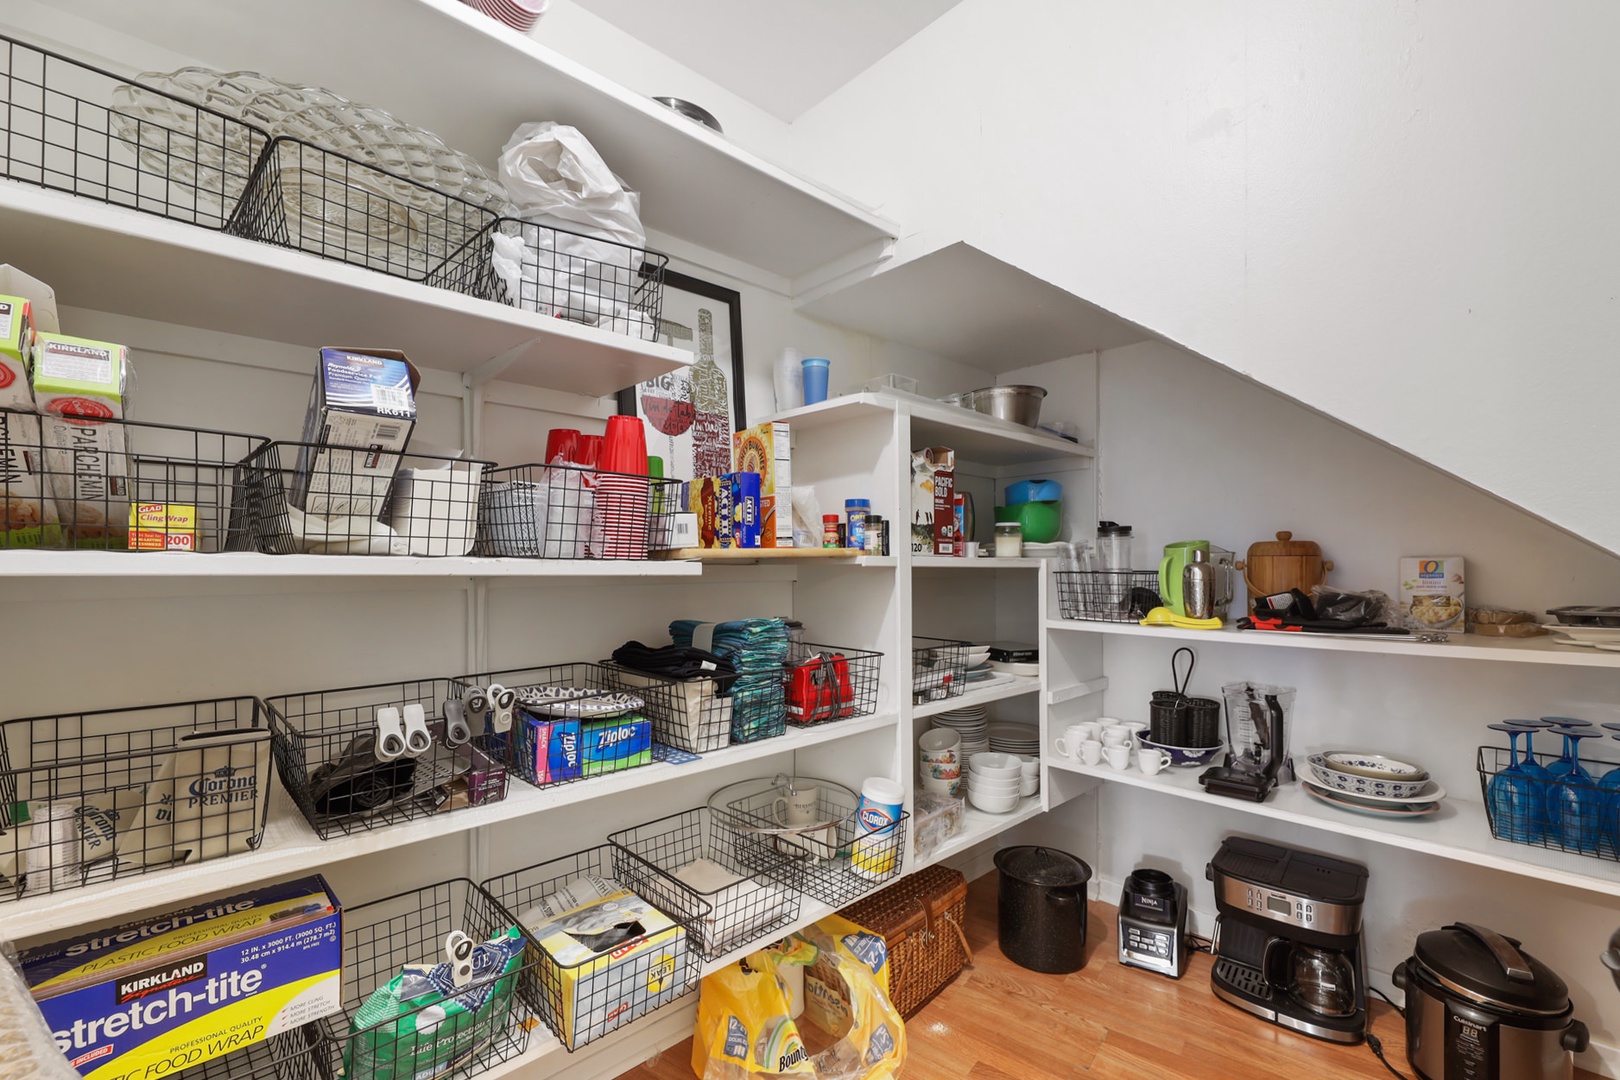 Pantry full of small appliances